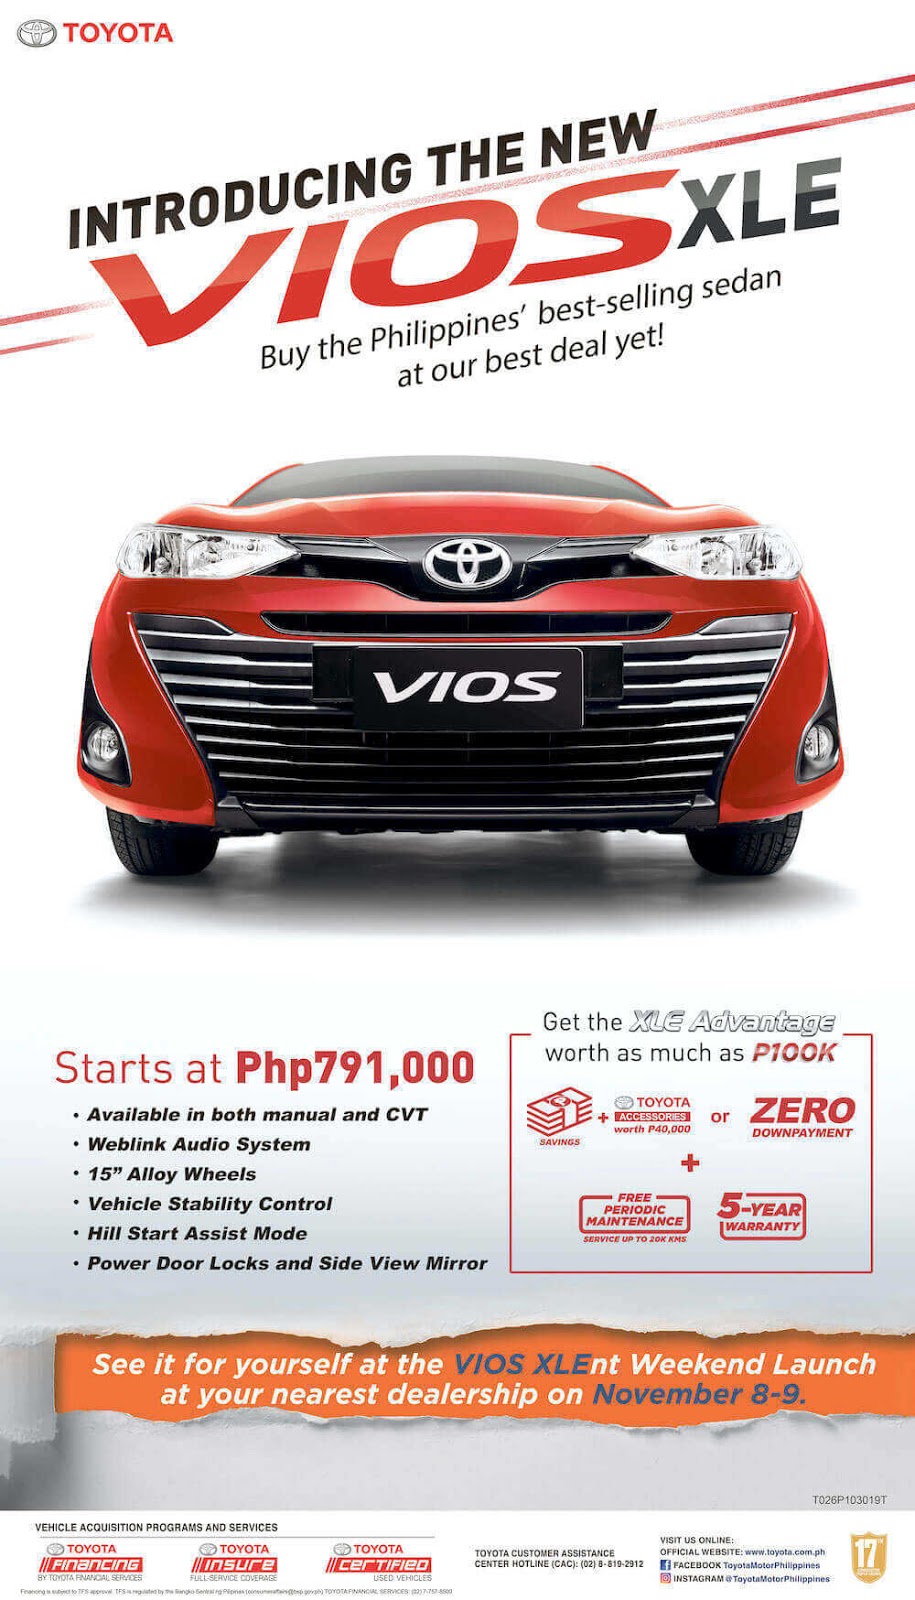 The Toyota Vios XLE is Available with Zero, Yes, Zero ...